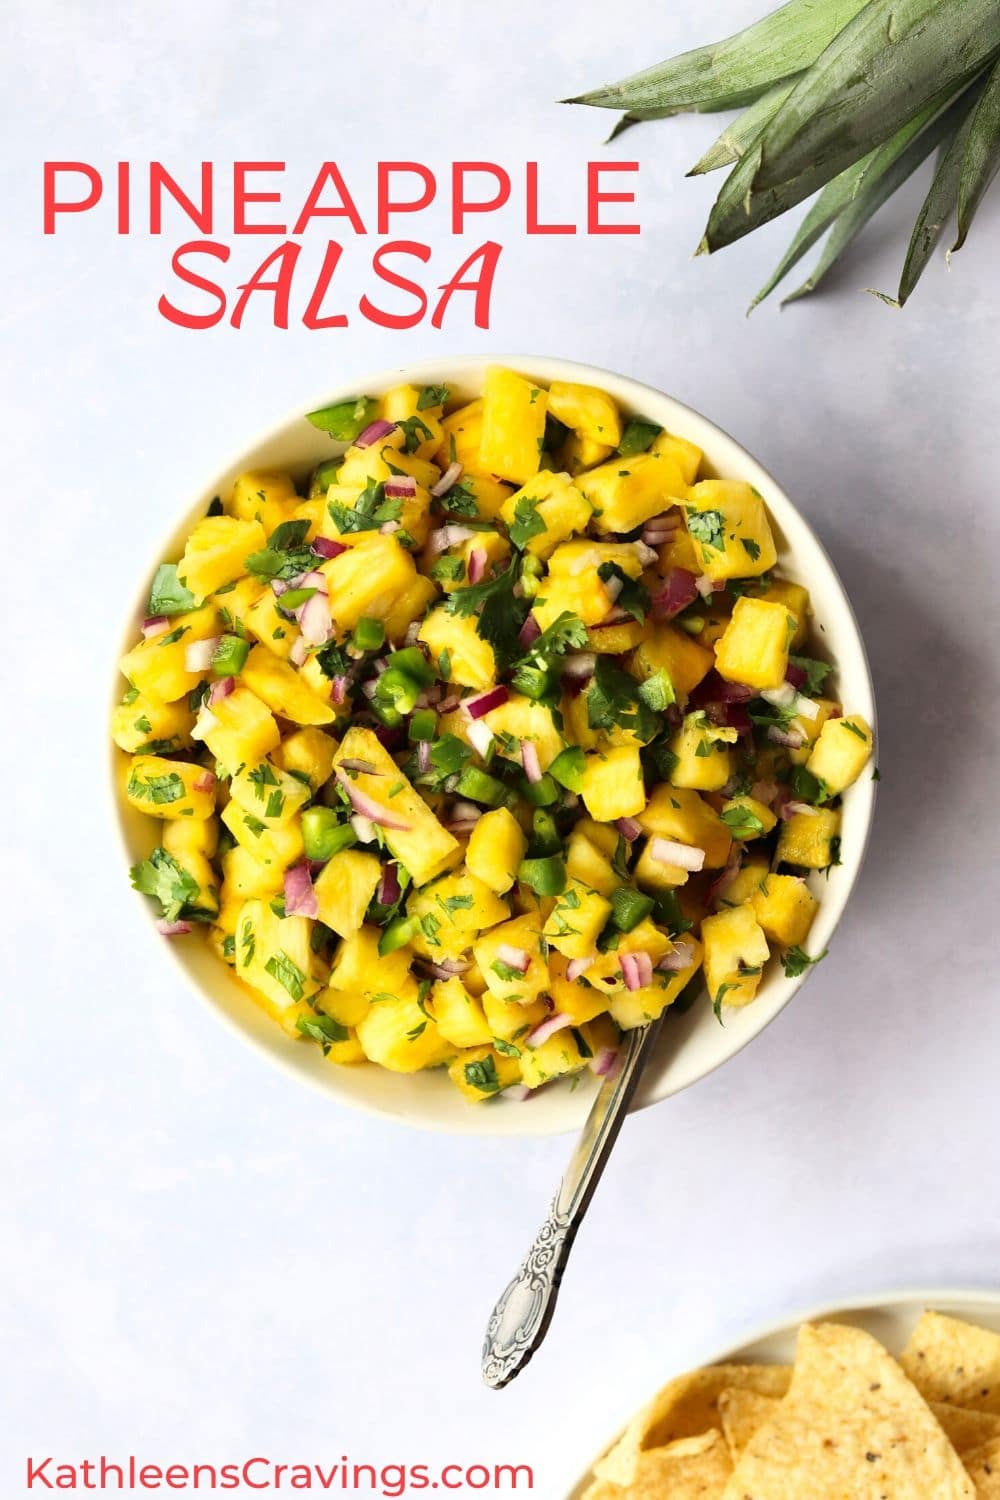 Pineapple salsa in bowl with spoon and pile of tortilla chips.